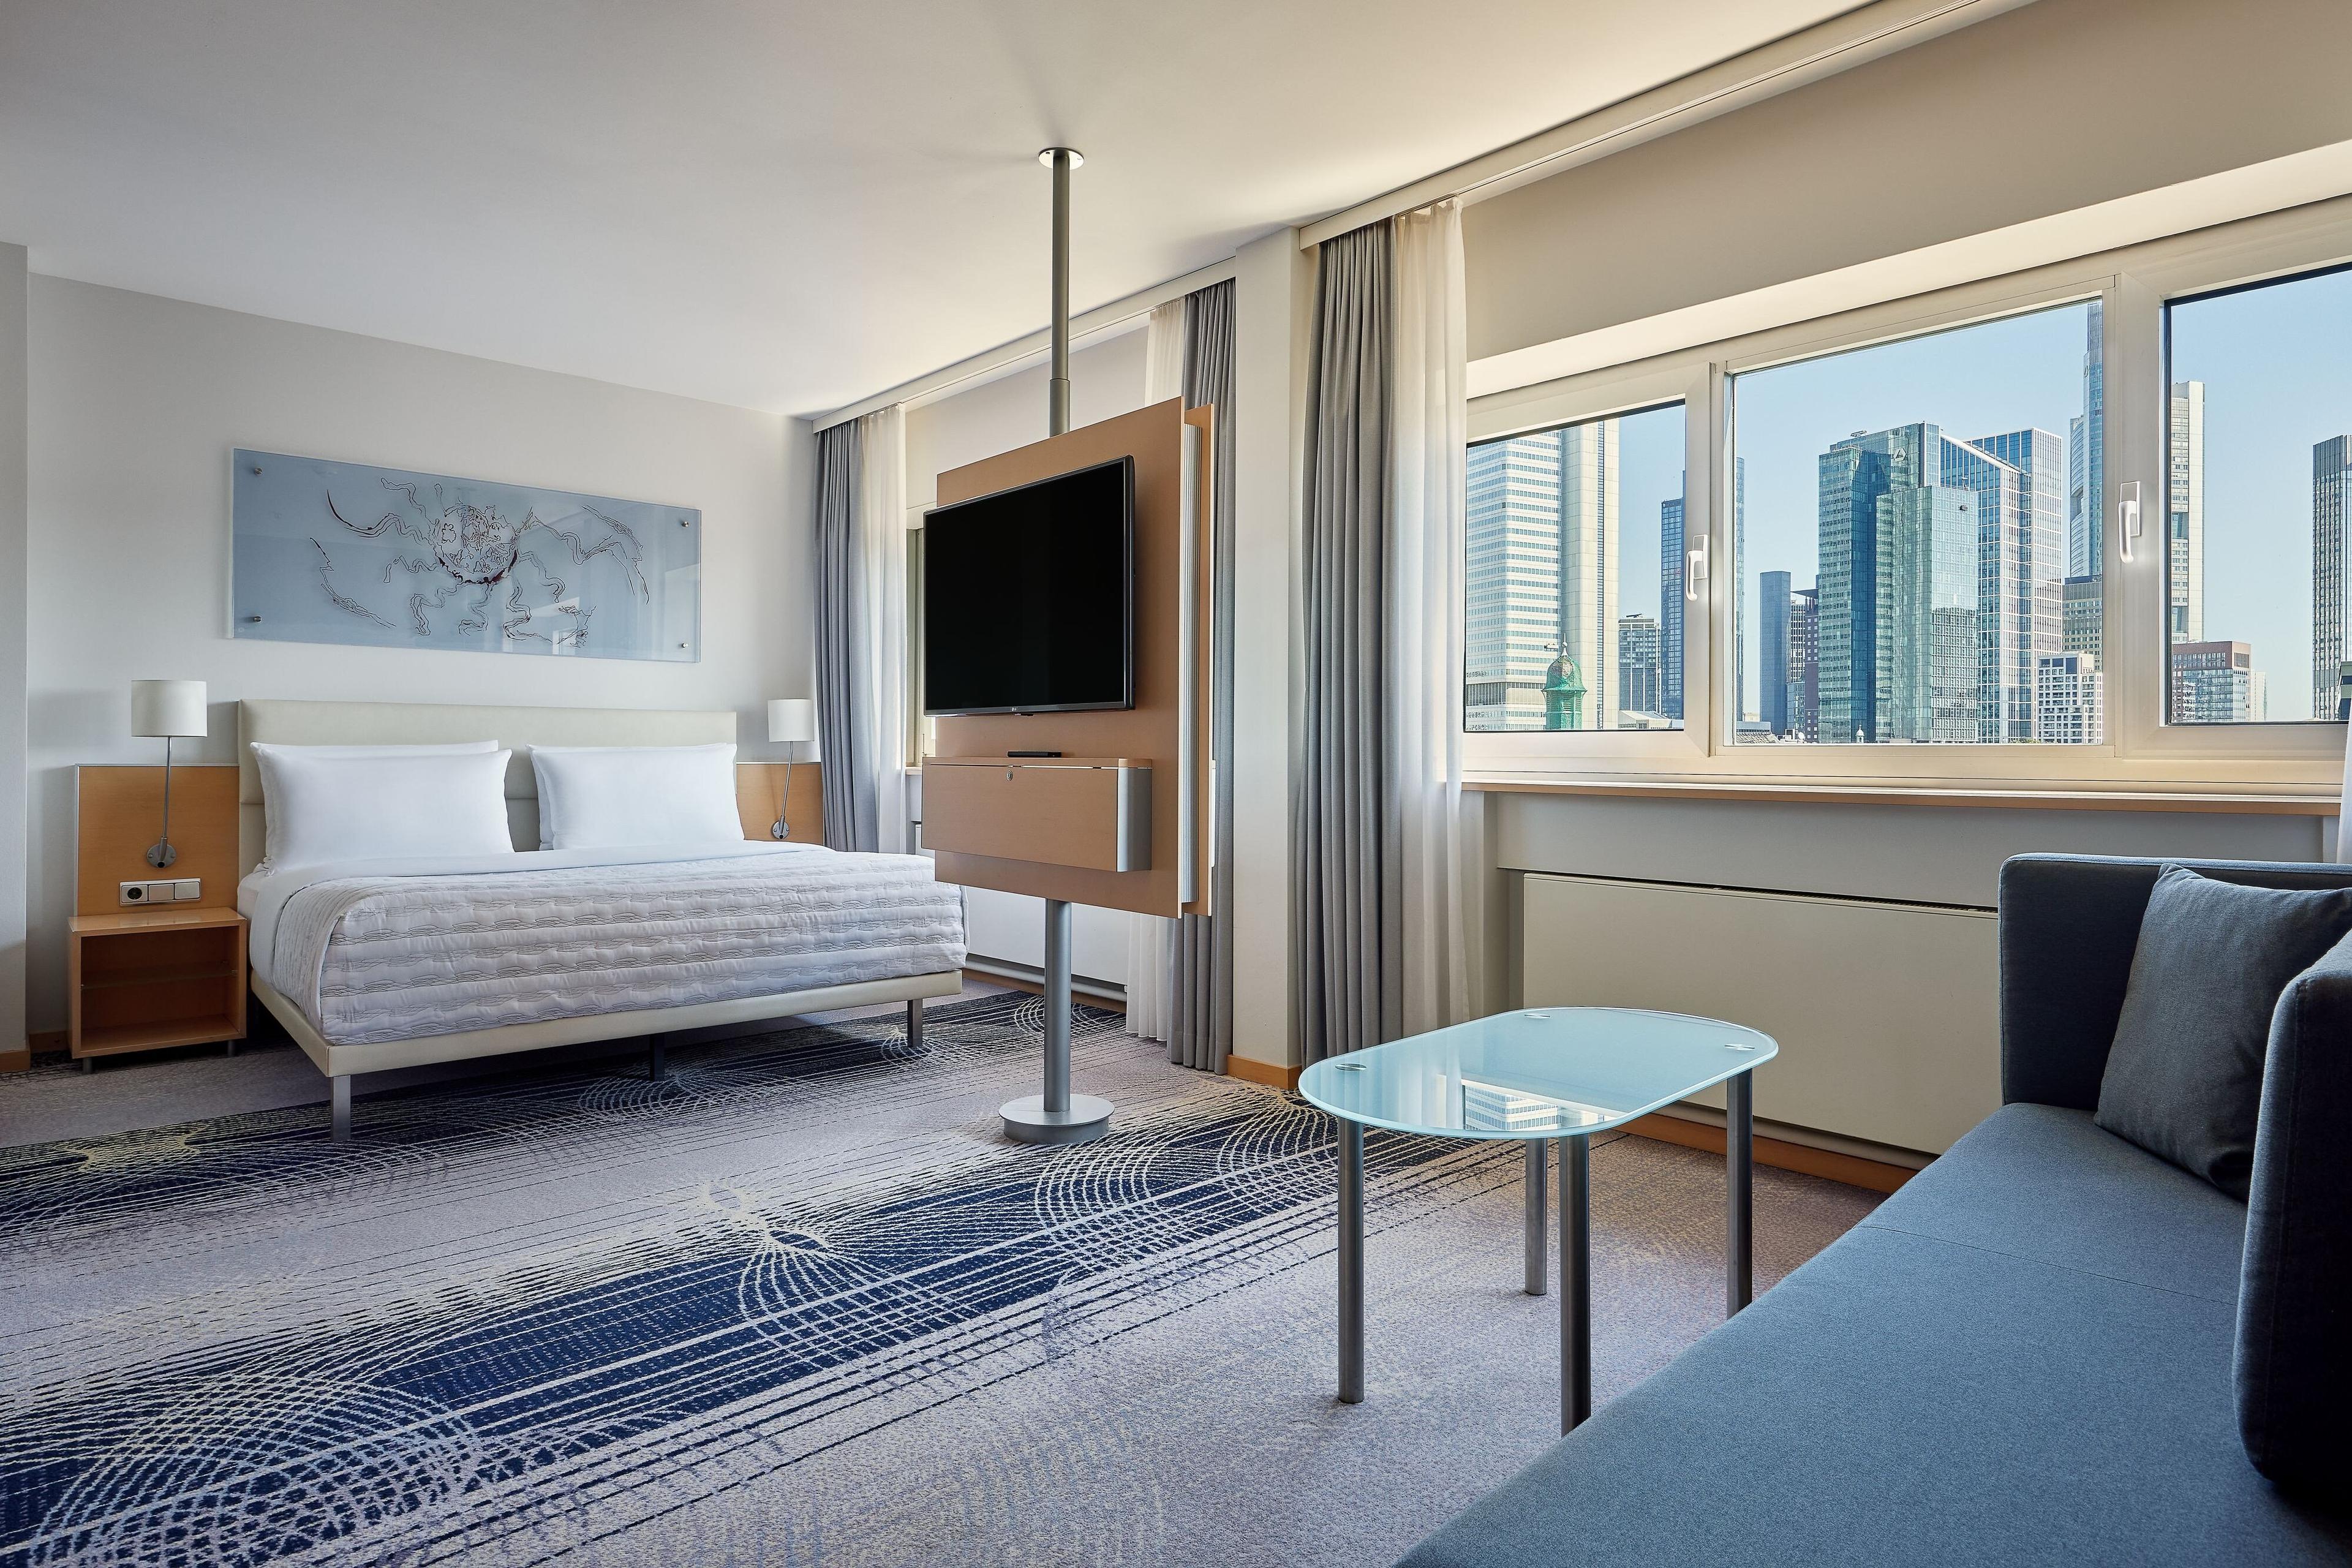 After an eventful day in the multifaceted metropolis Frankfurt, you’ll want to enjoy some time alone in the quiet of your room with a great view on the skyline.